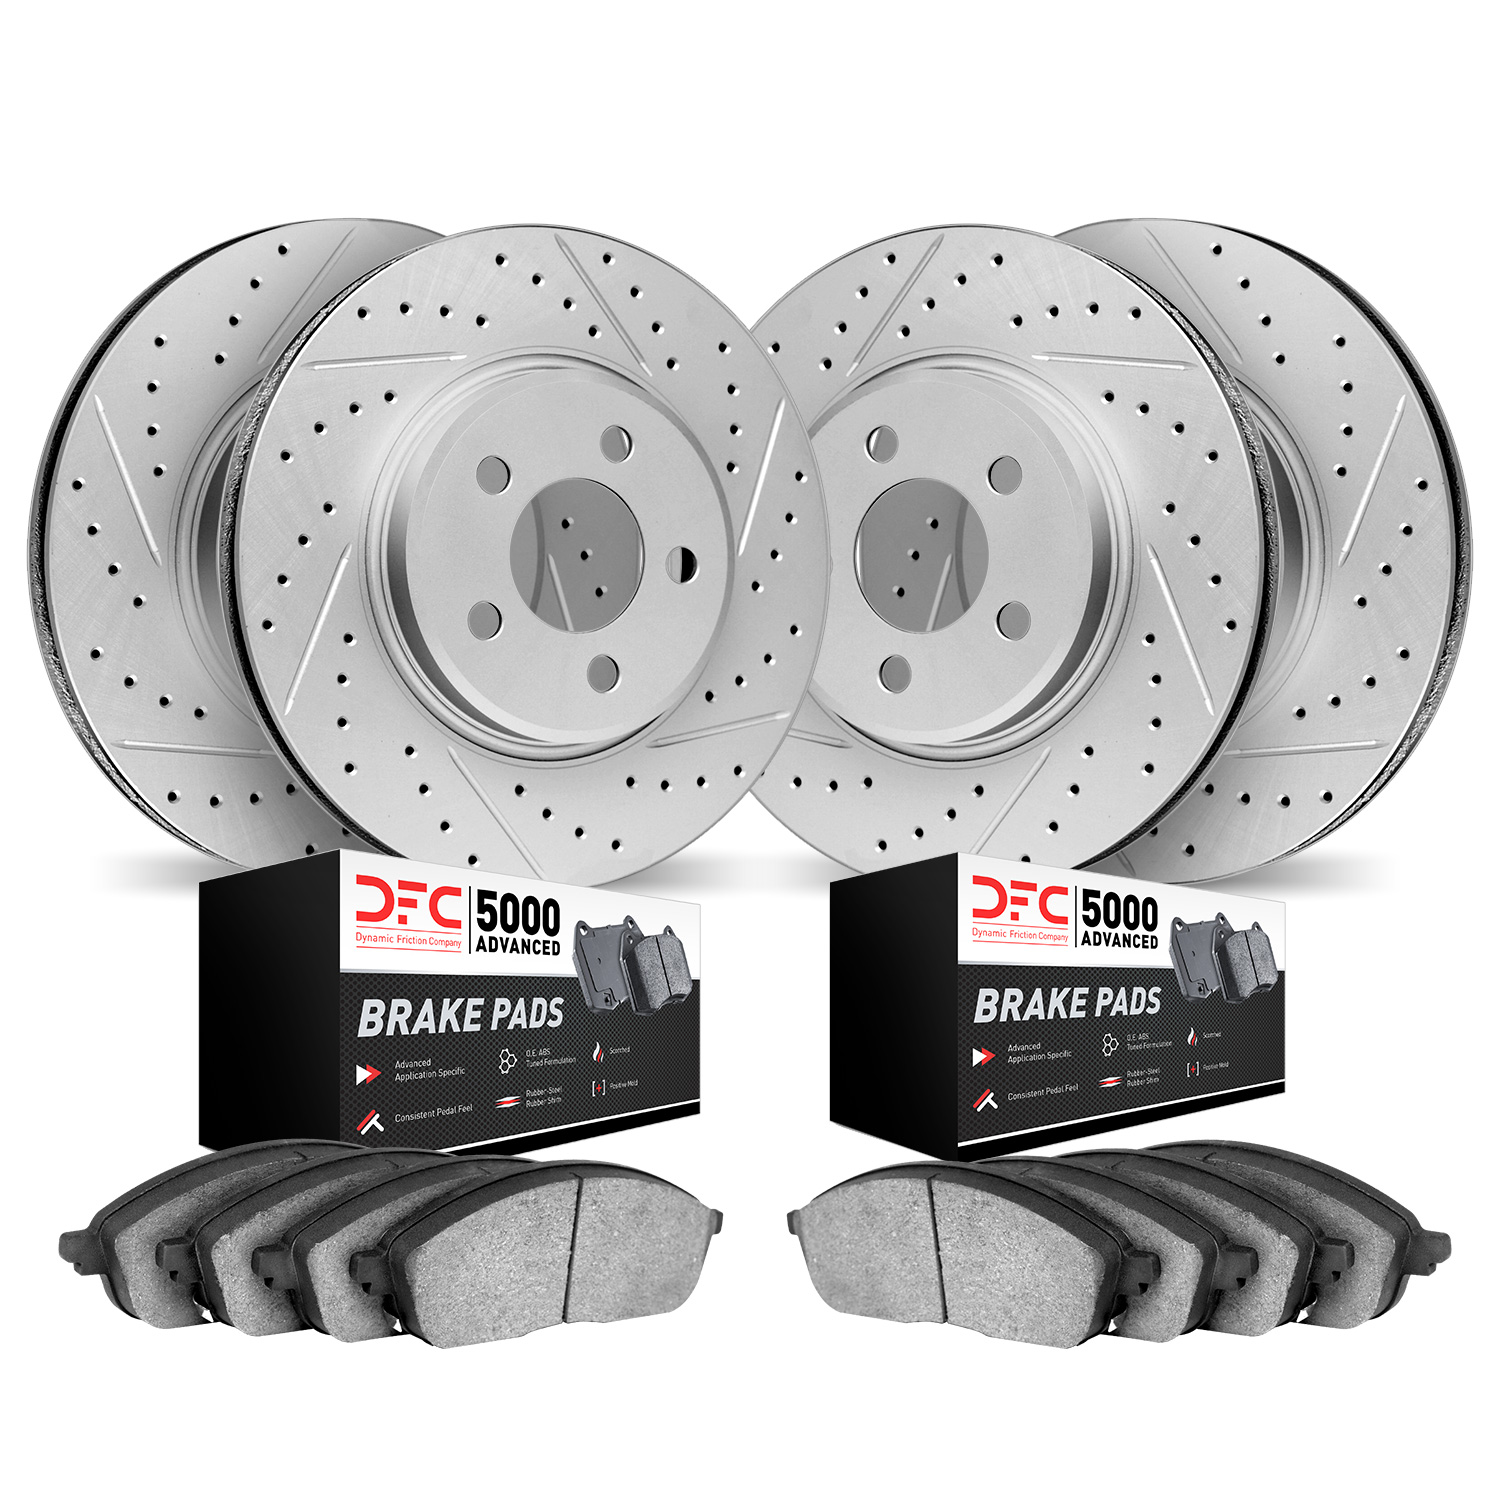 2504-31028 Geoperformance Drilled/Slotted Rotors w/5000 Advanced Brake Pads Kit, 2009-2010 BMW, Position: Front and Rear